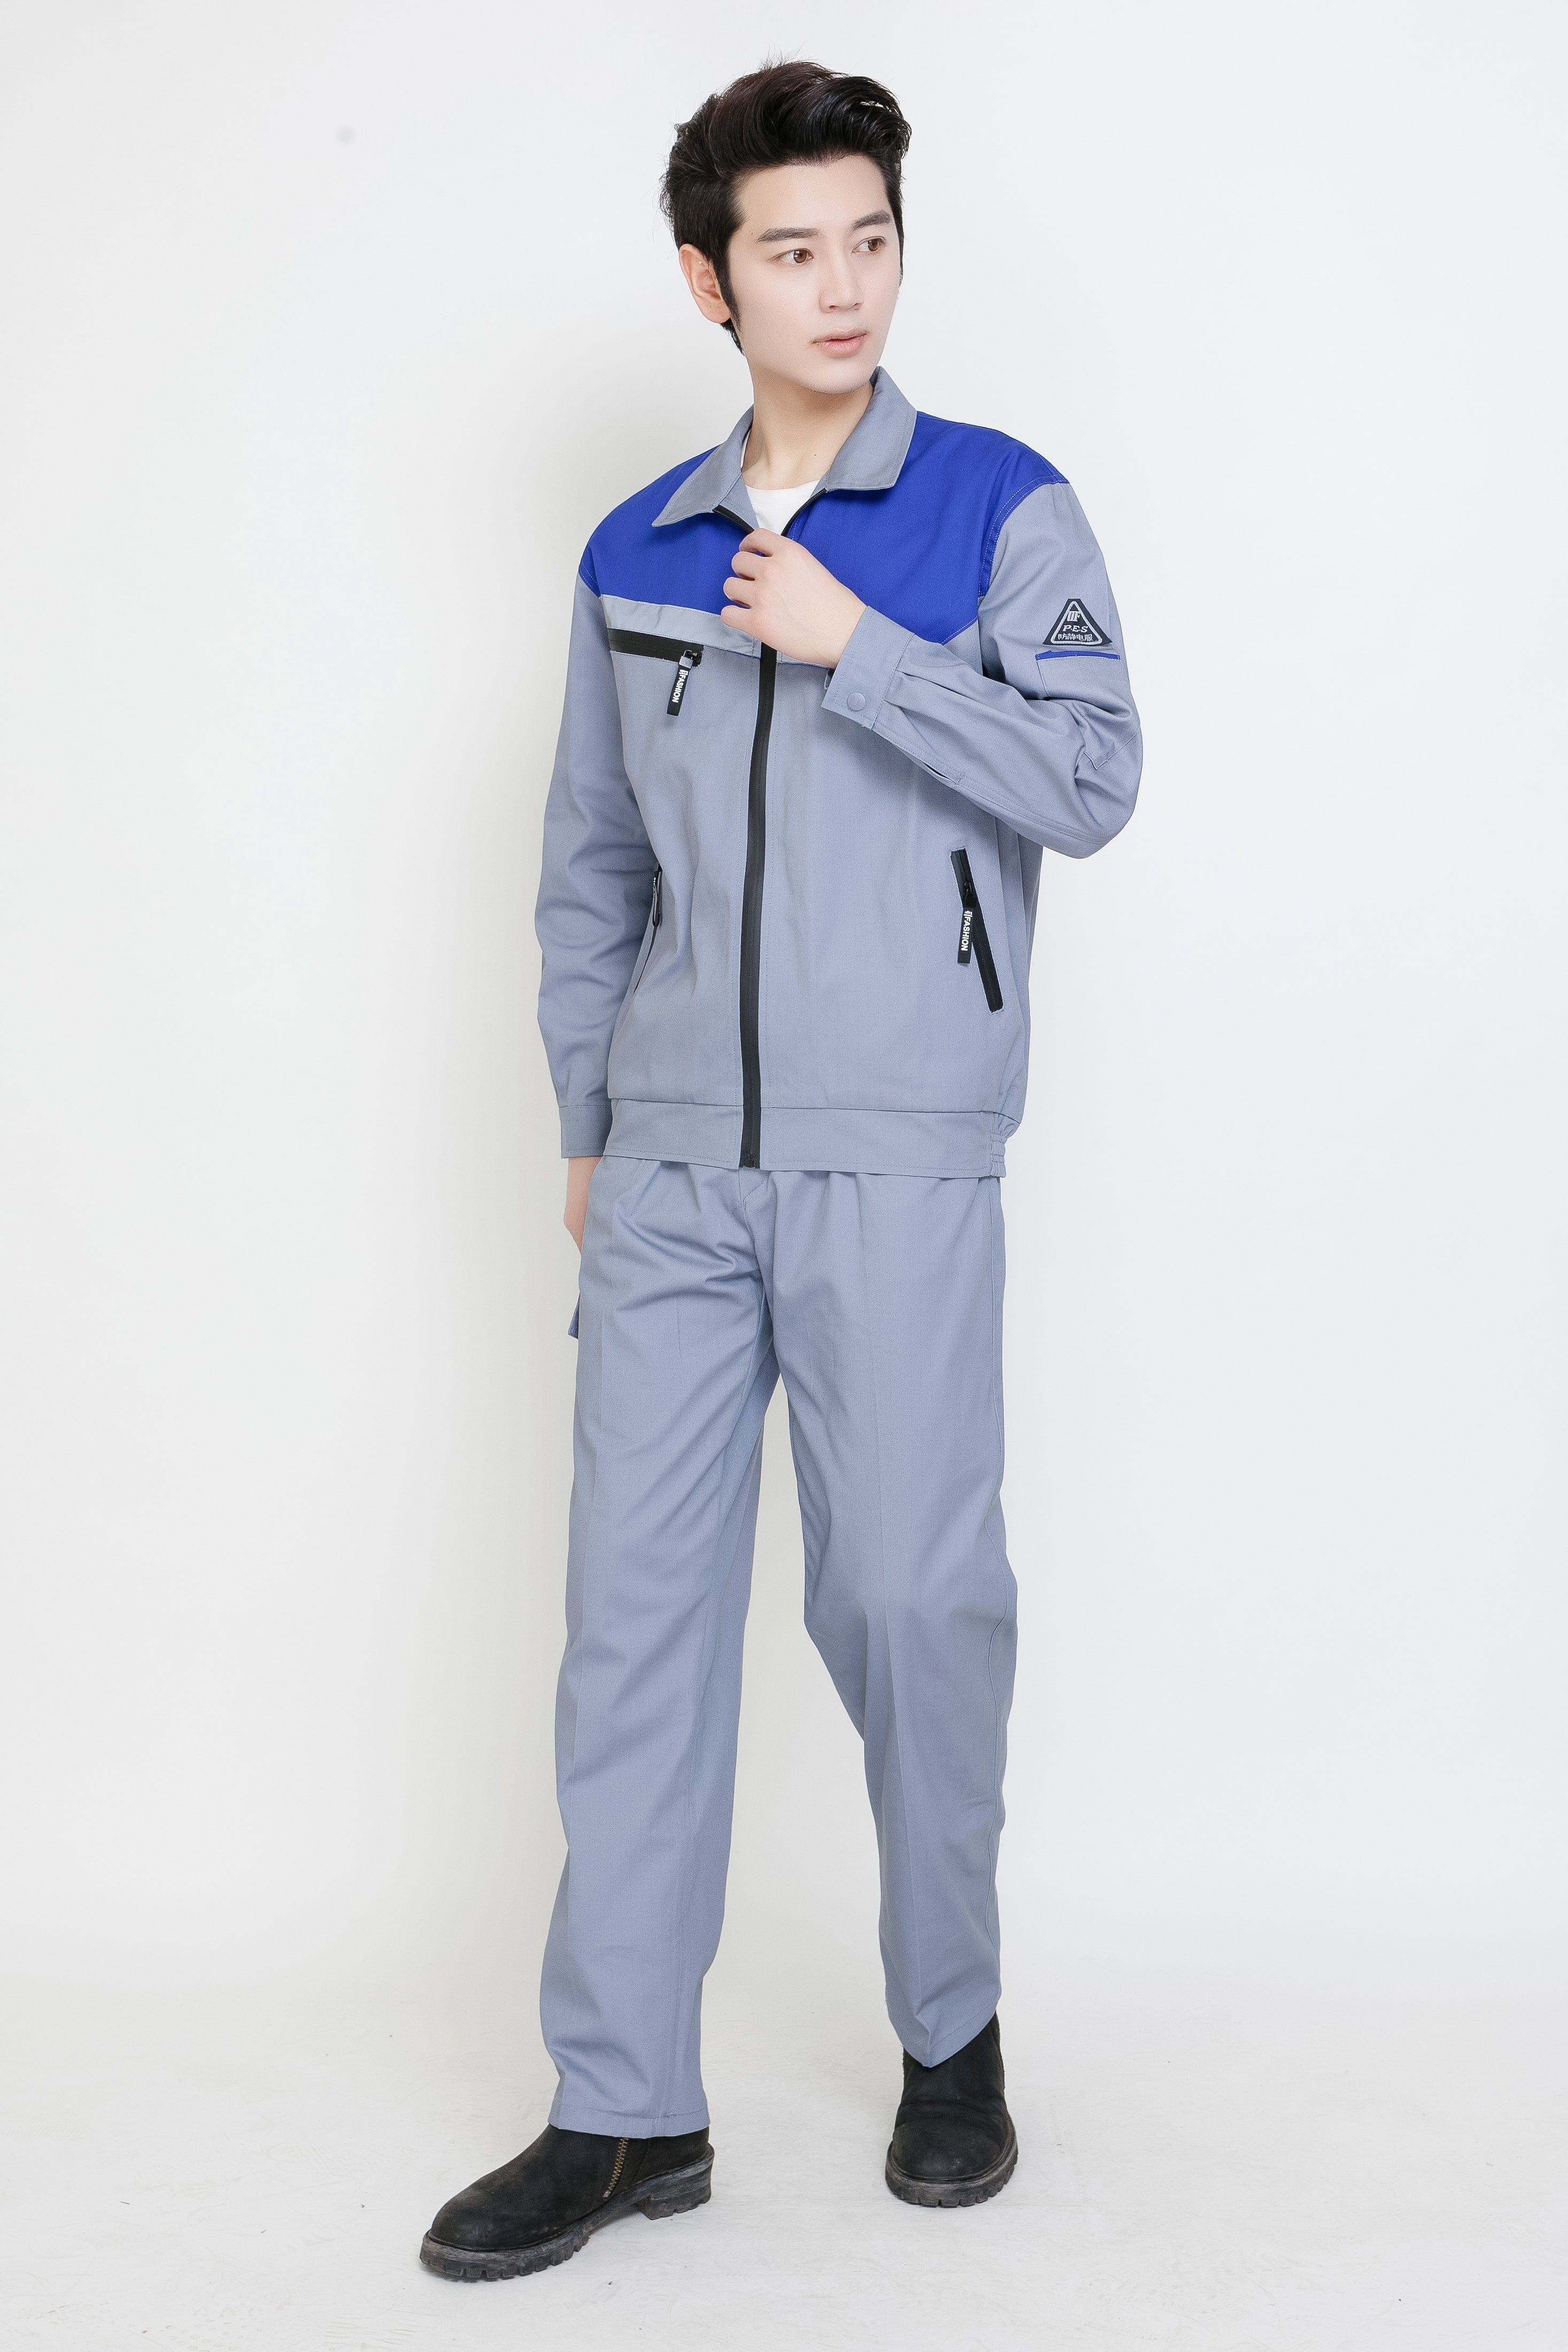 Corals Trading Co. 可樂思百貨商行 涤棉抗静电 Spring and Autumn style long-sleeved anti-static work clothes series SD-AS-W401